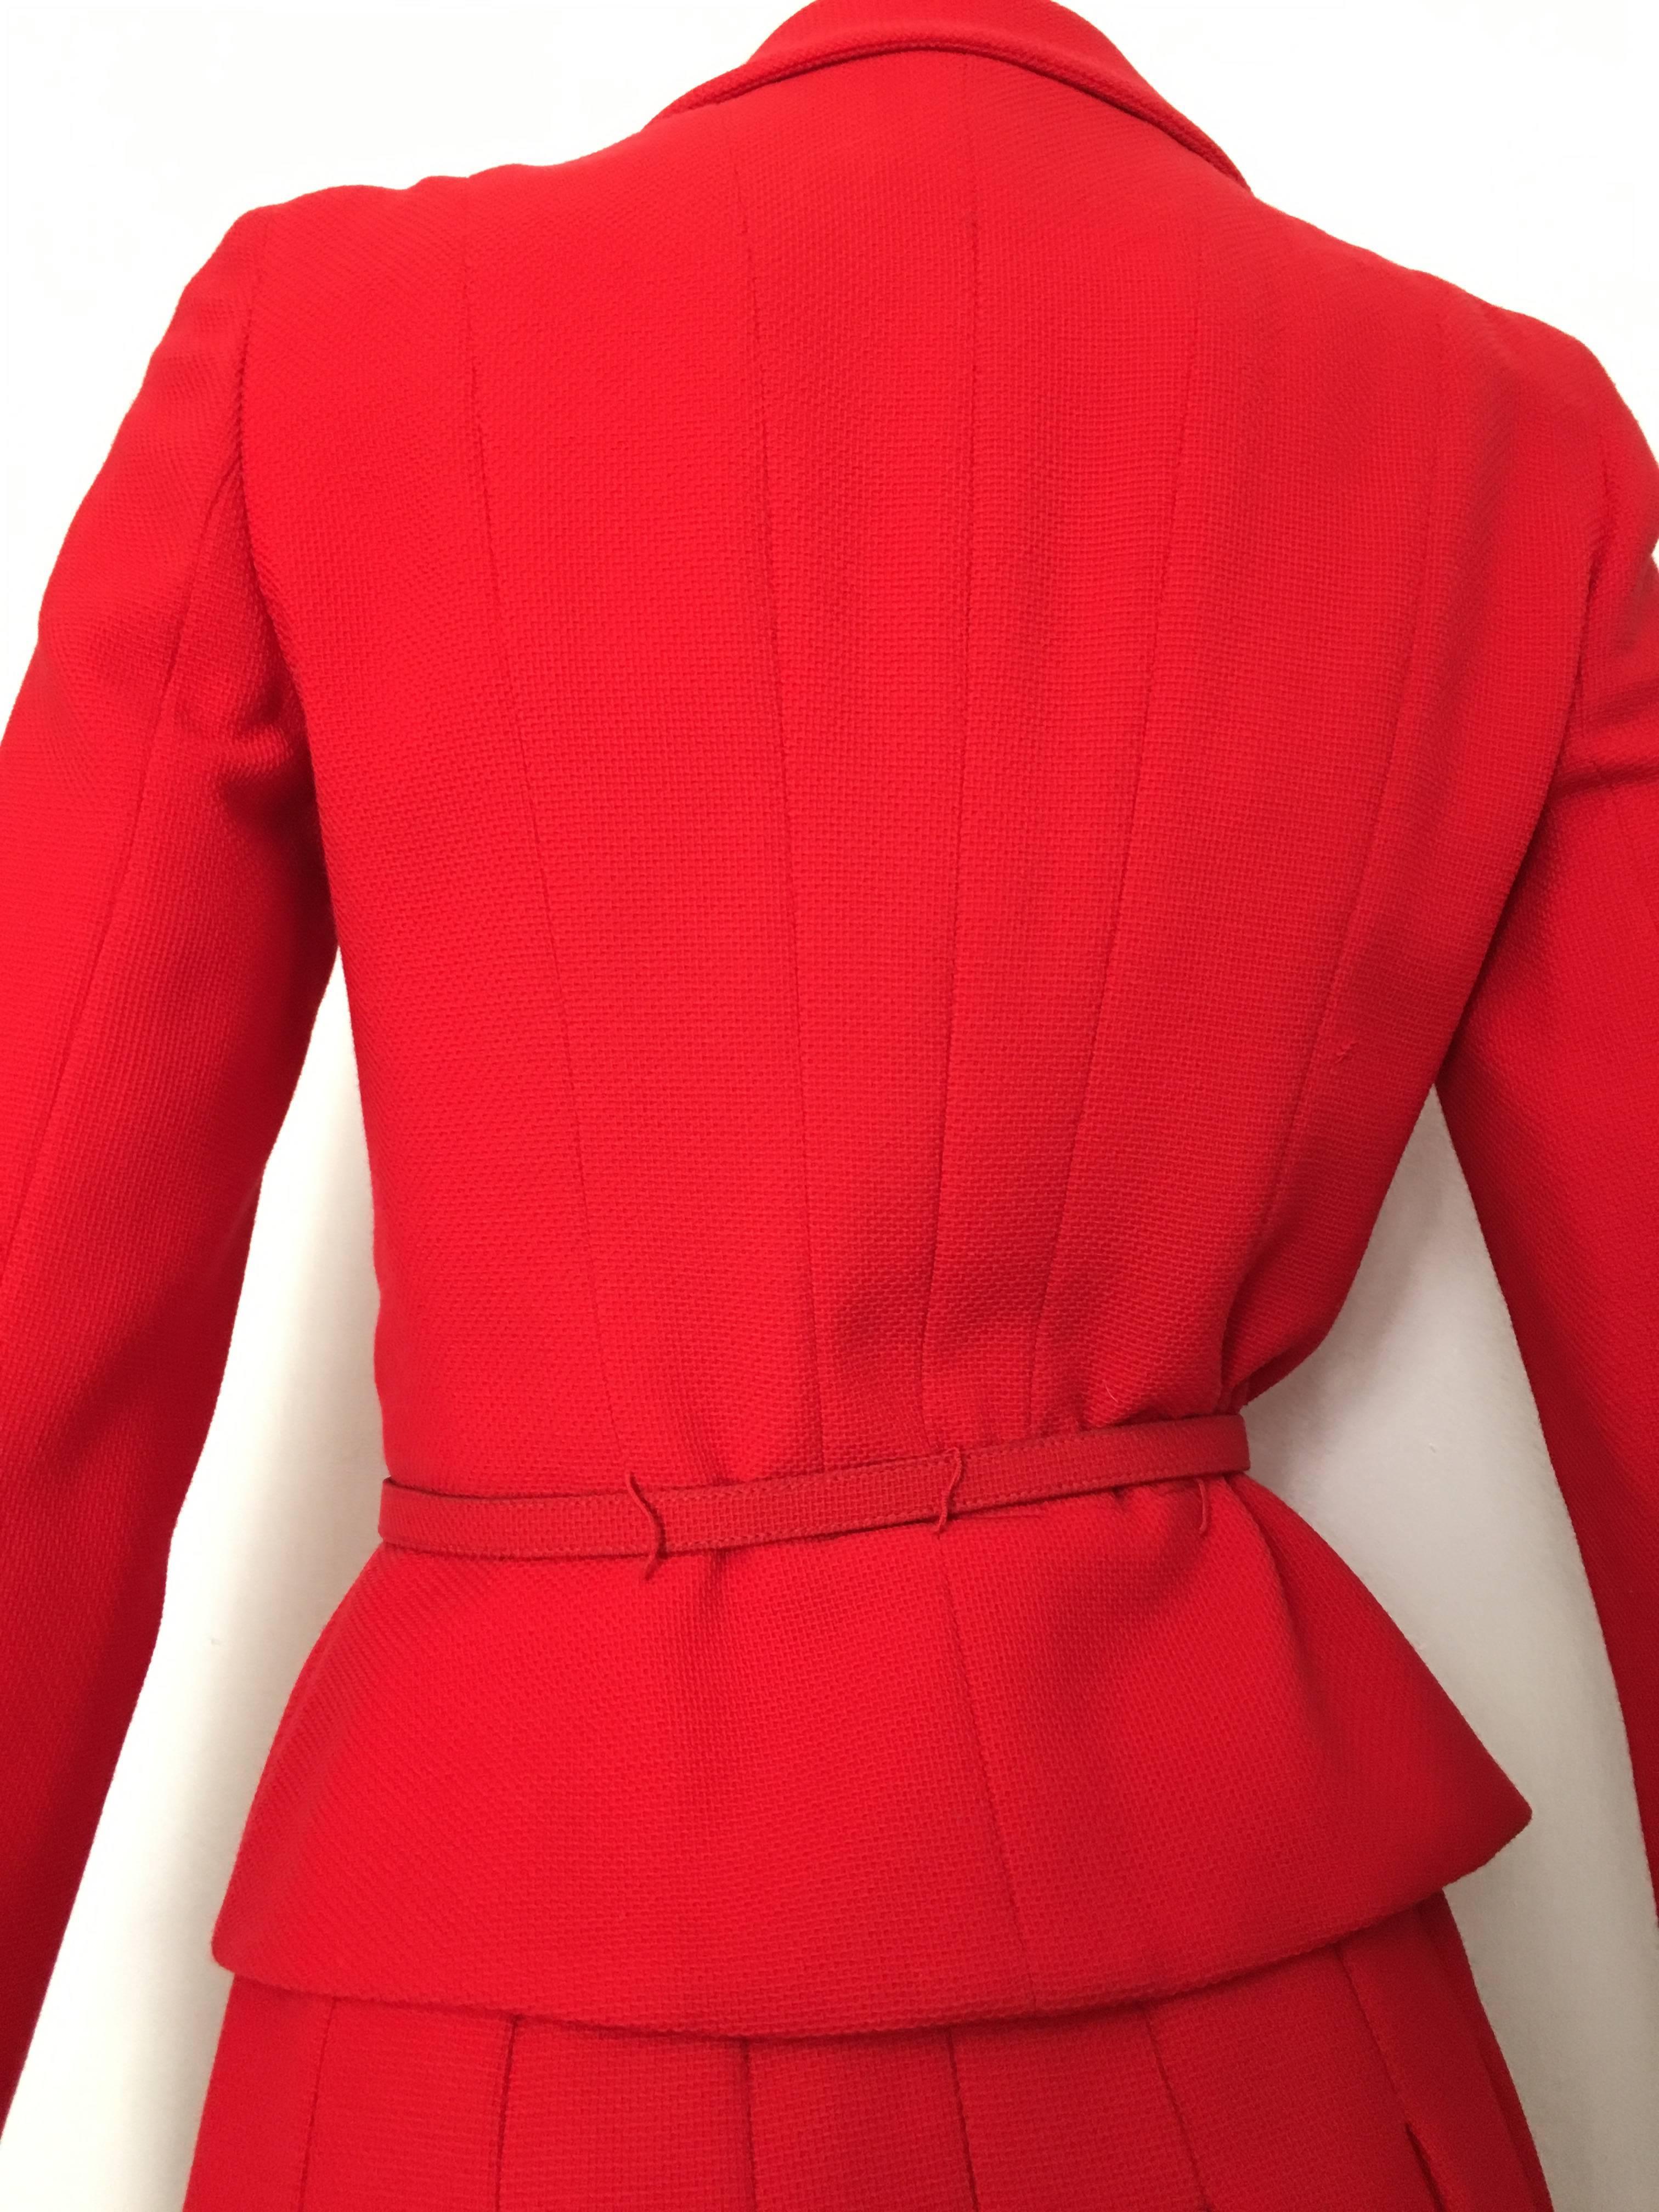 Chanel Red Suit Jacket & Pleated Skirt Size 4. 1